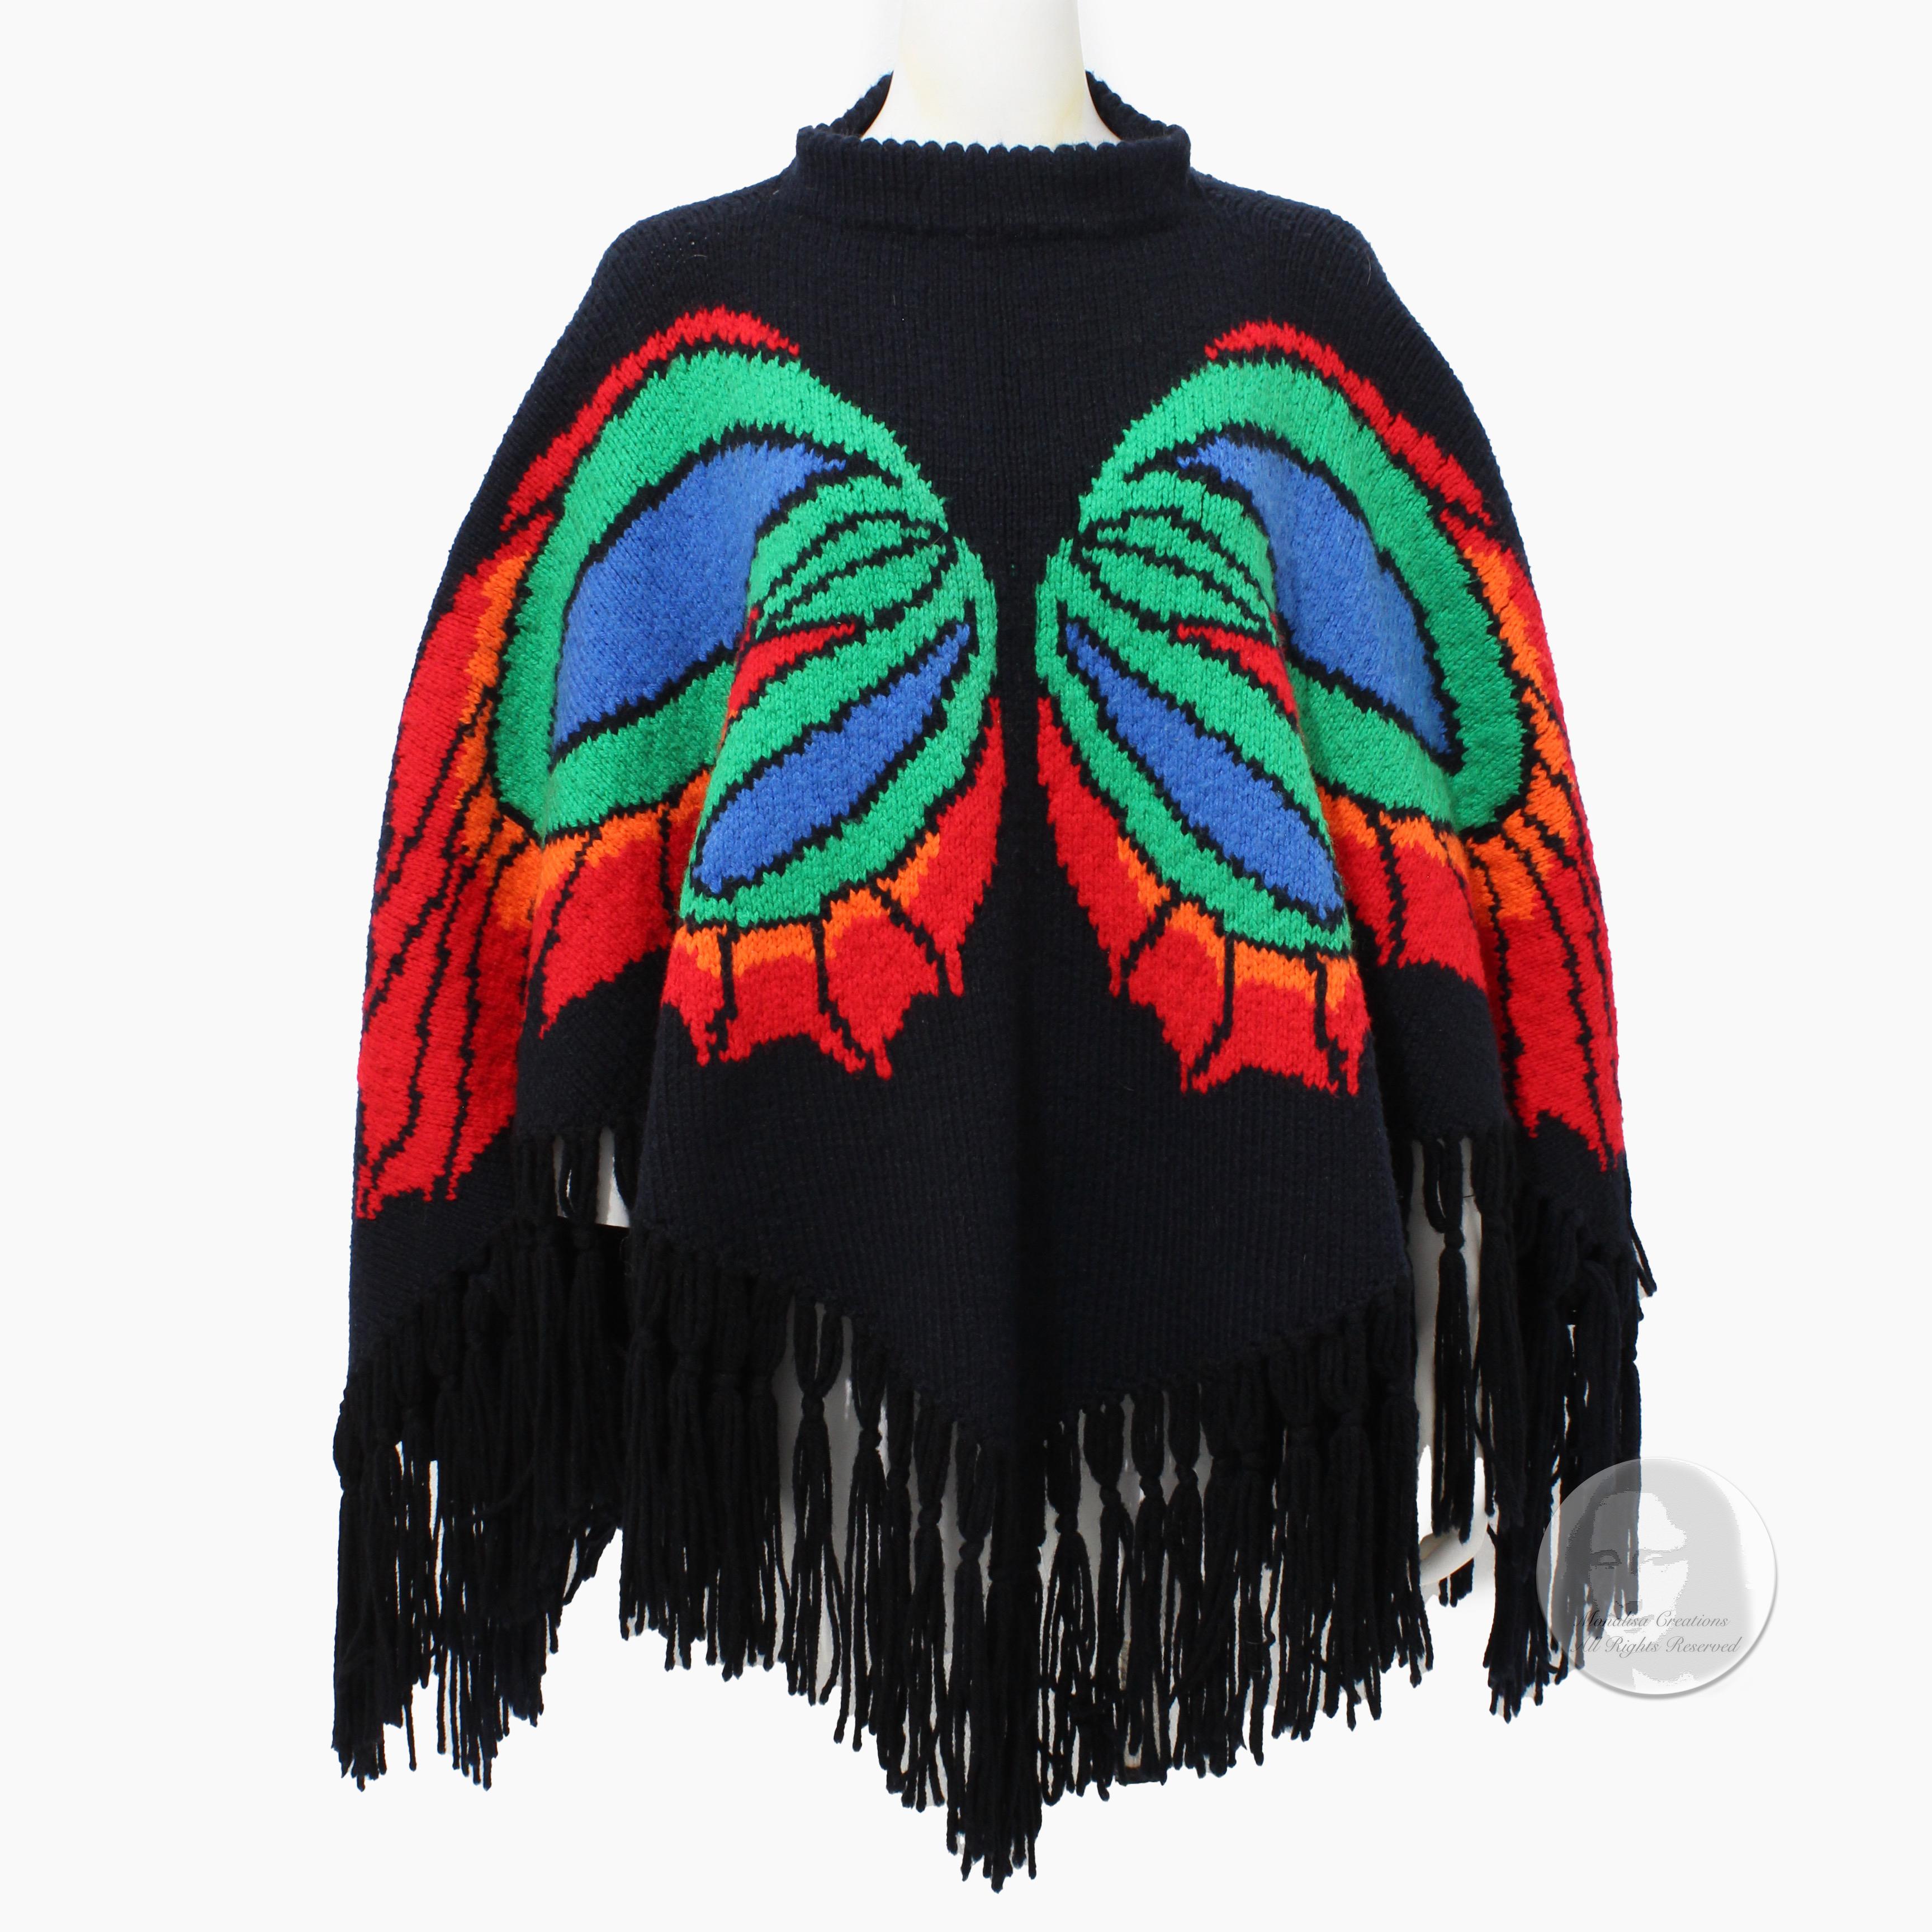 Preowned, vintage knit poncho with butterfly motif and fringe, likely made in the 80s. We love the contrast of the butterfly against the black background - it's so pretty. 

A great hippie boho piece! No manufacturer, content or size label - it